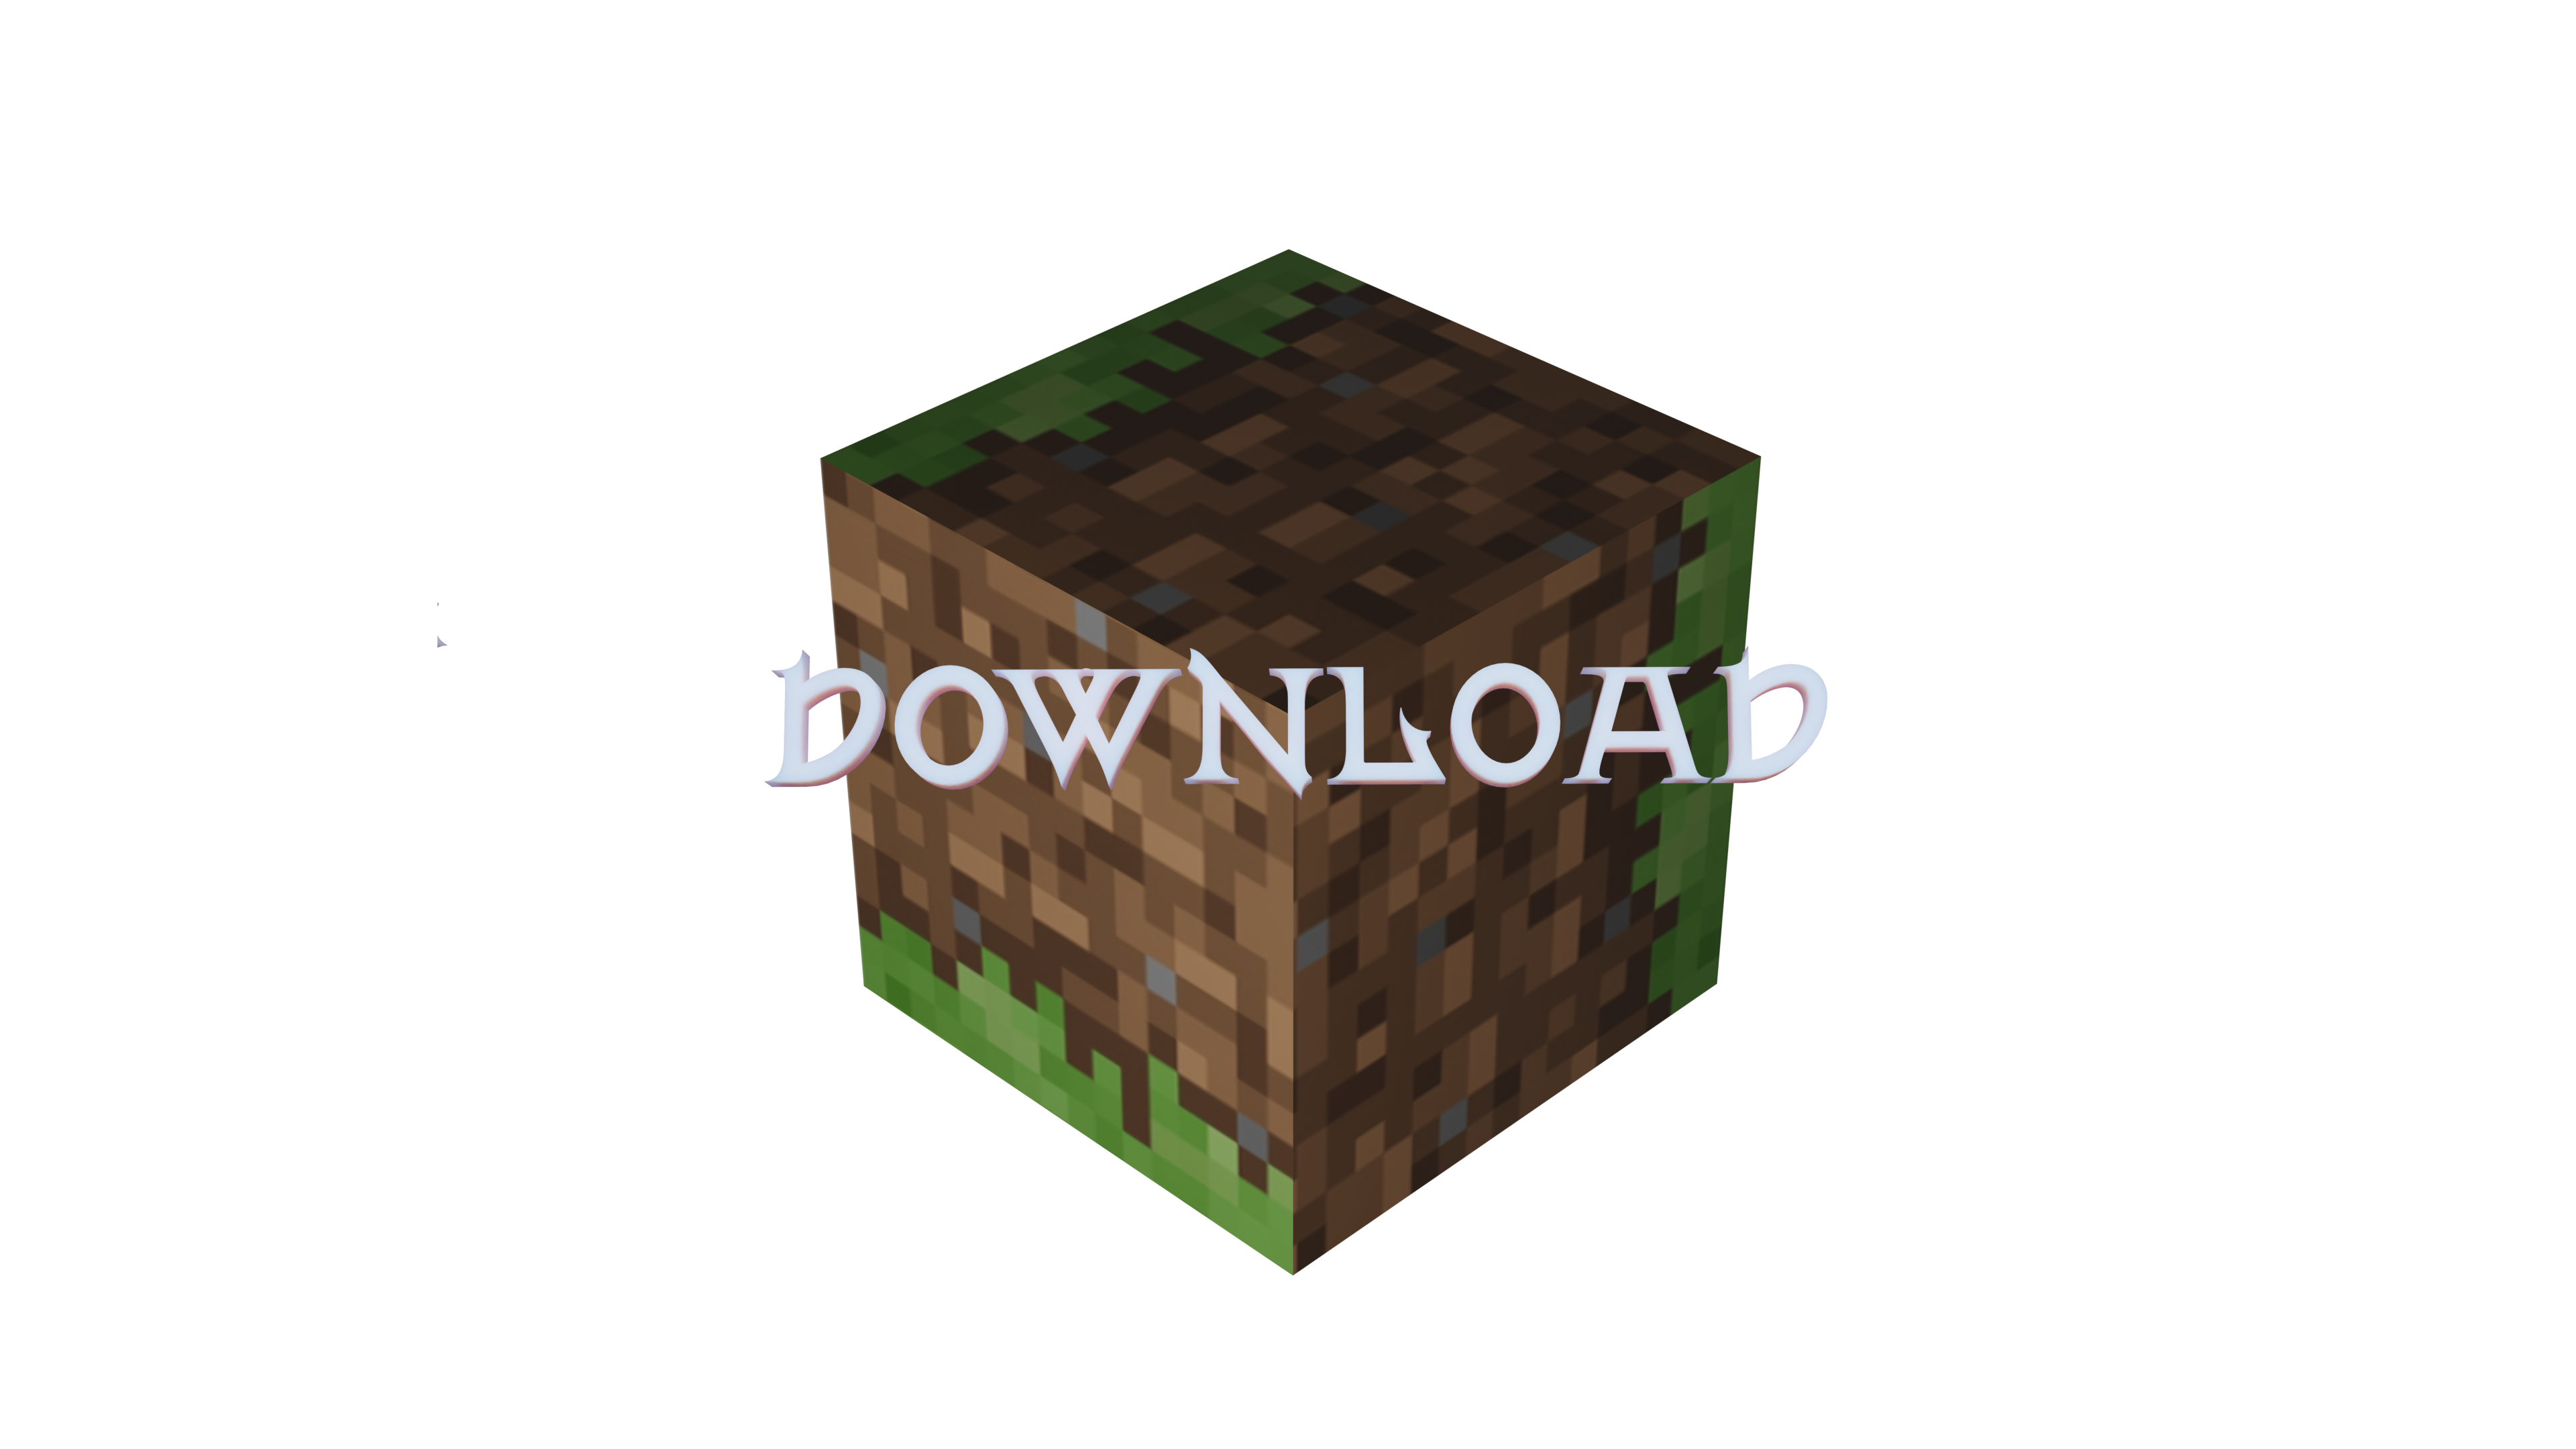 A cube-shaped Minecraft block, skinned as grass but with the textures in the wrong alignment